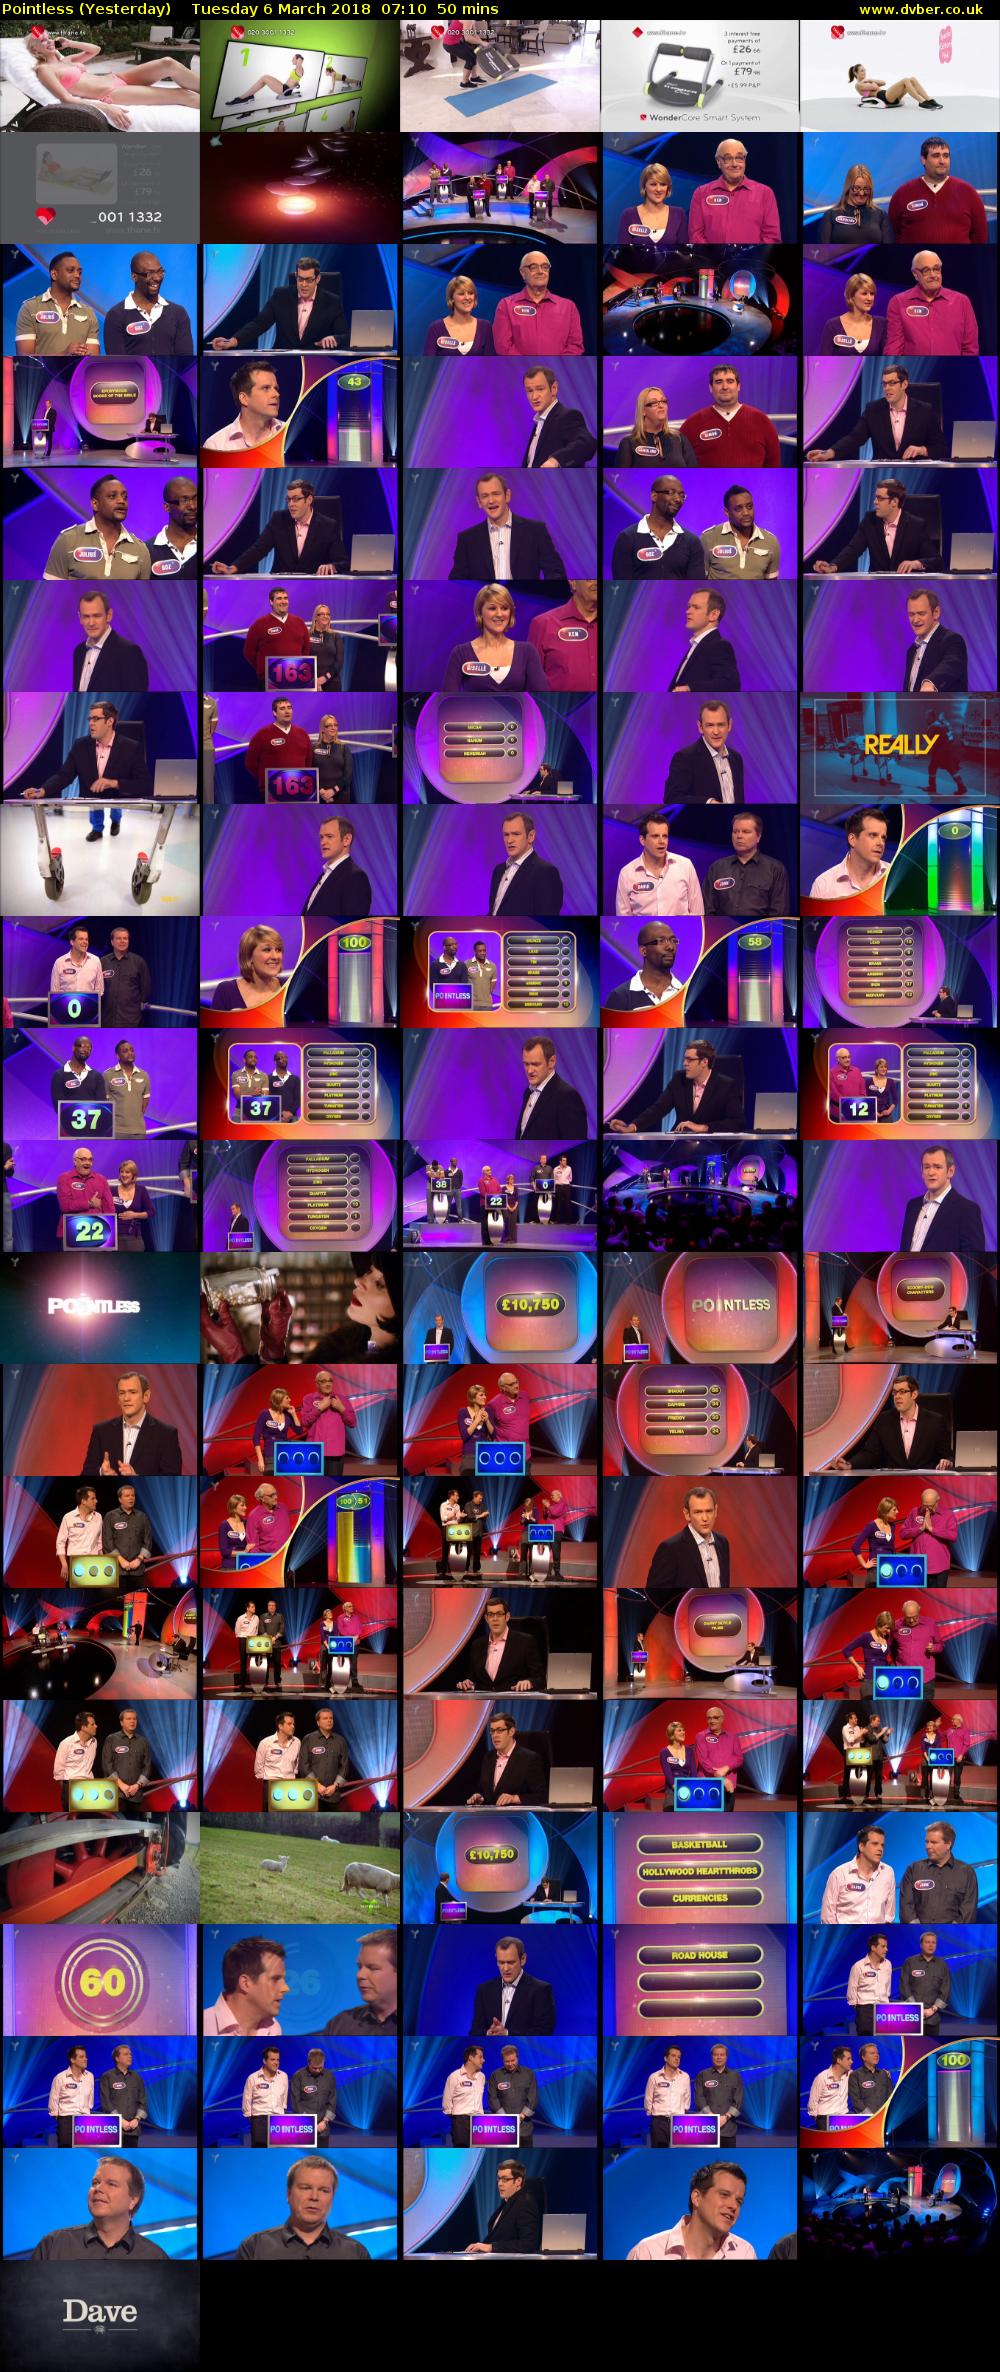 Pointless (Yesterday) Tuesday 6 March 2018 07:10 - 08:00